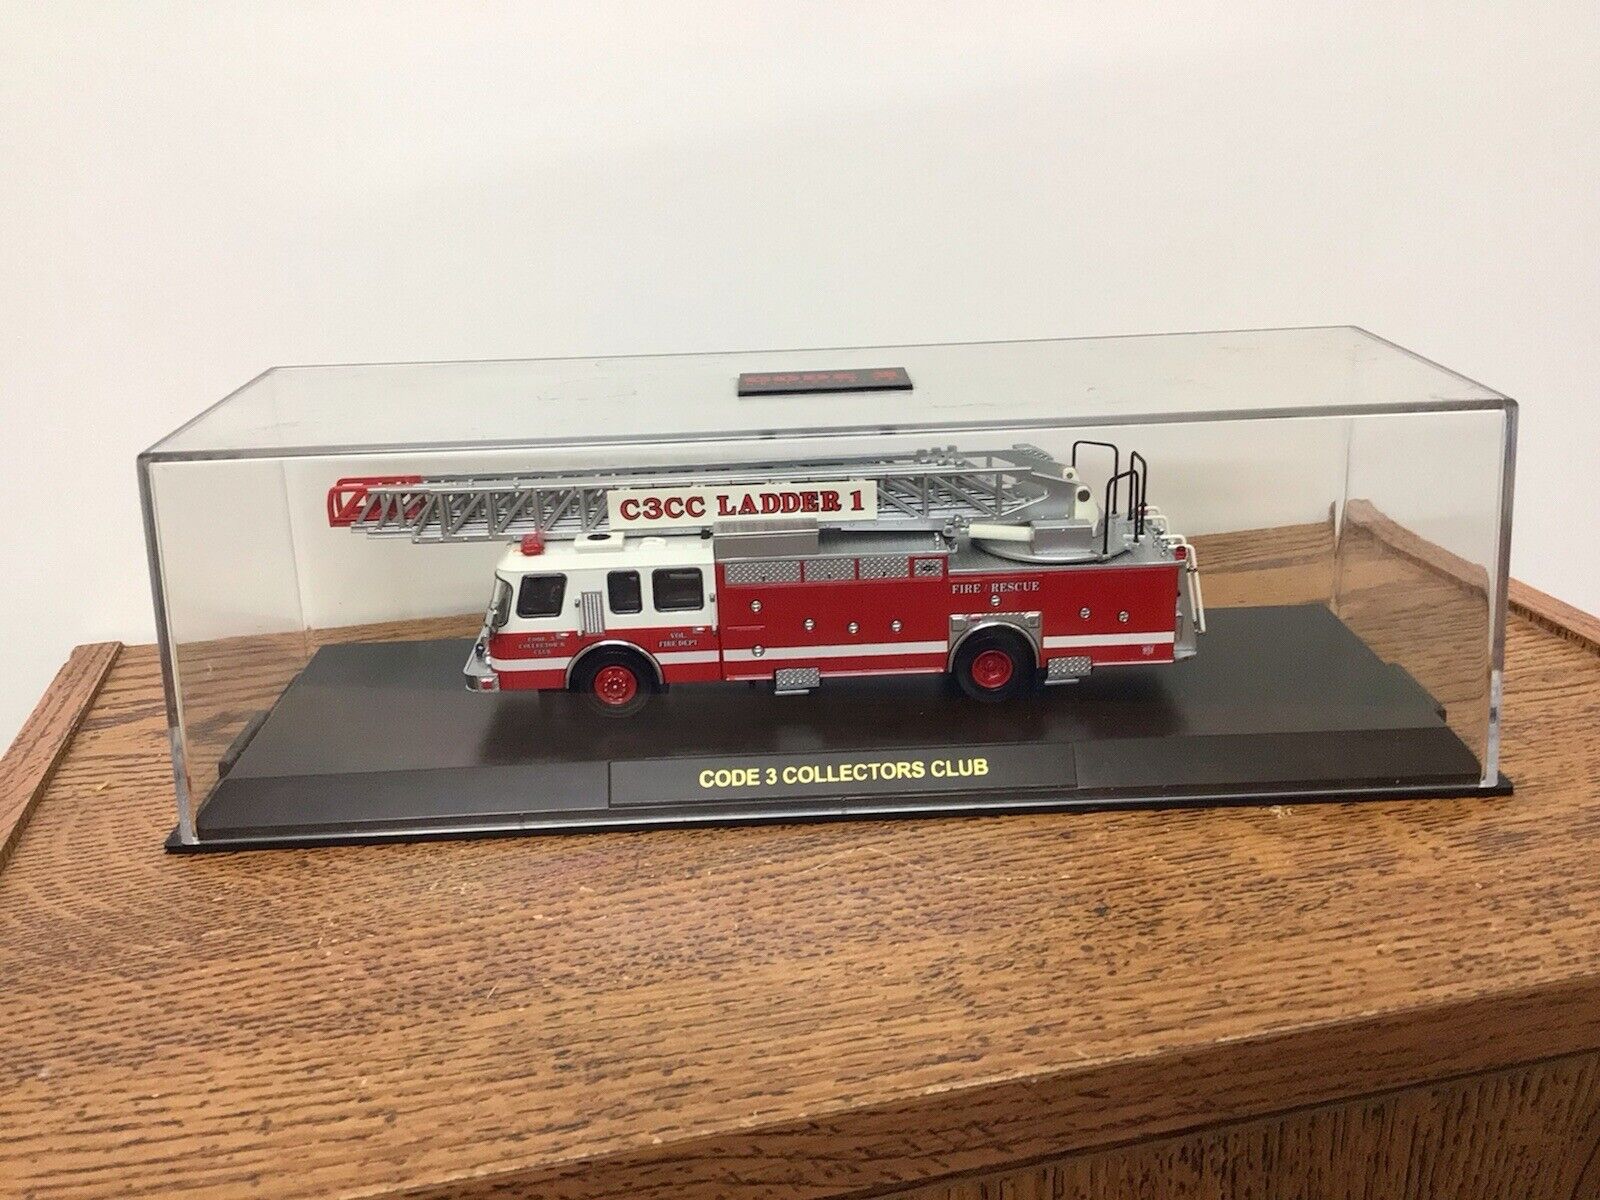 MINT Code 3 Collectors Club 1/64 E One Ladder 1 C3CC Fire Truck in DISPLAY CASE